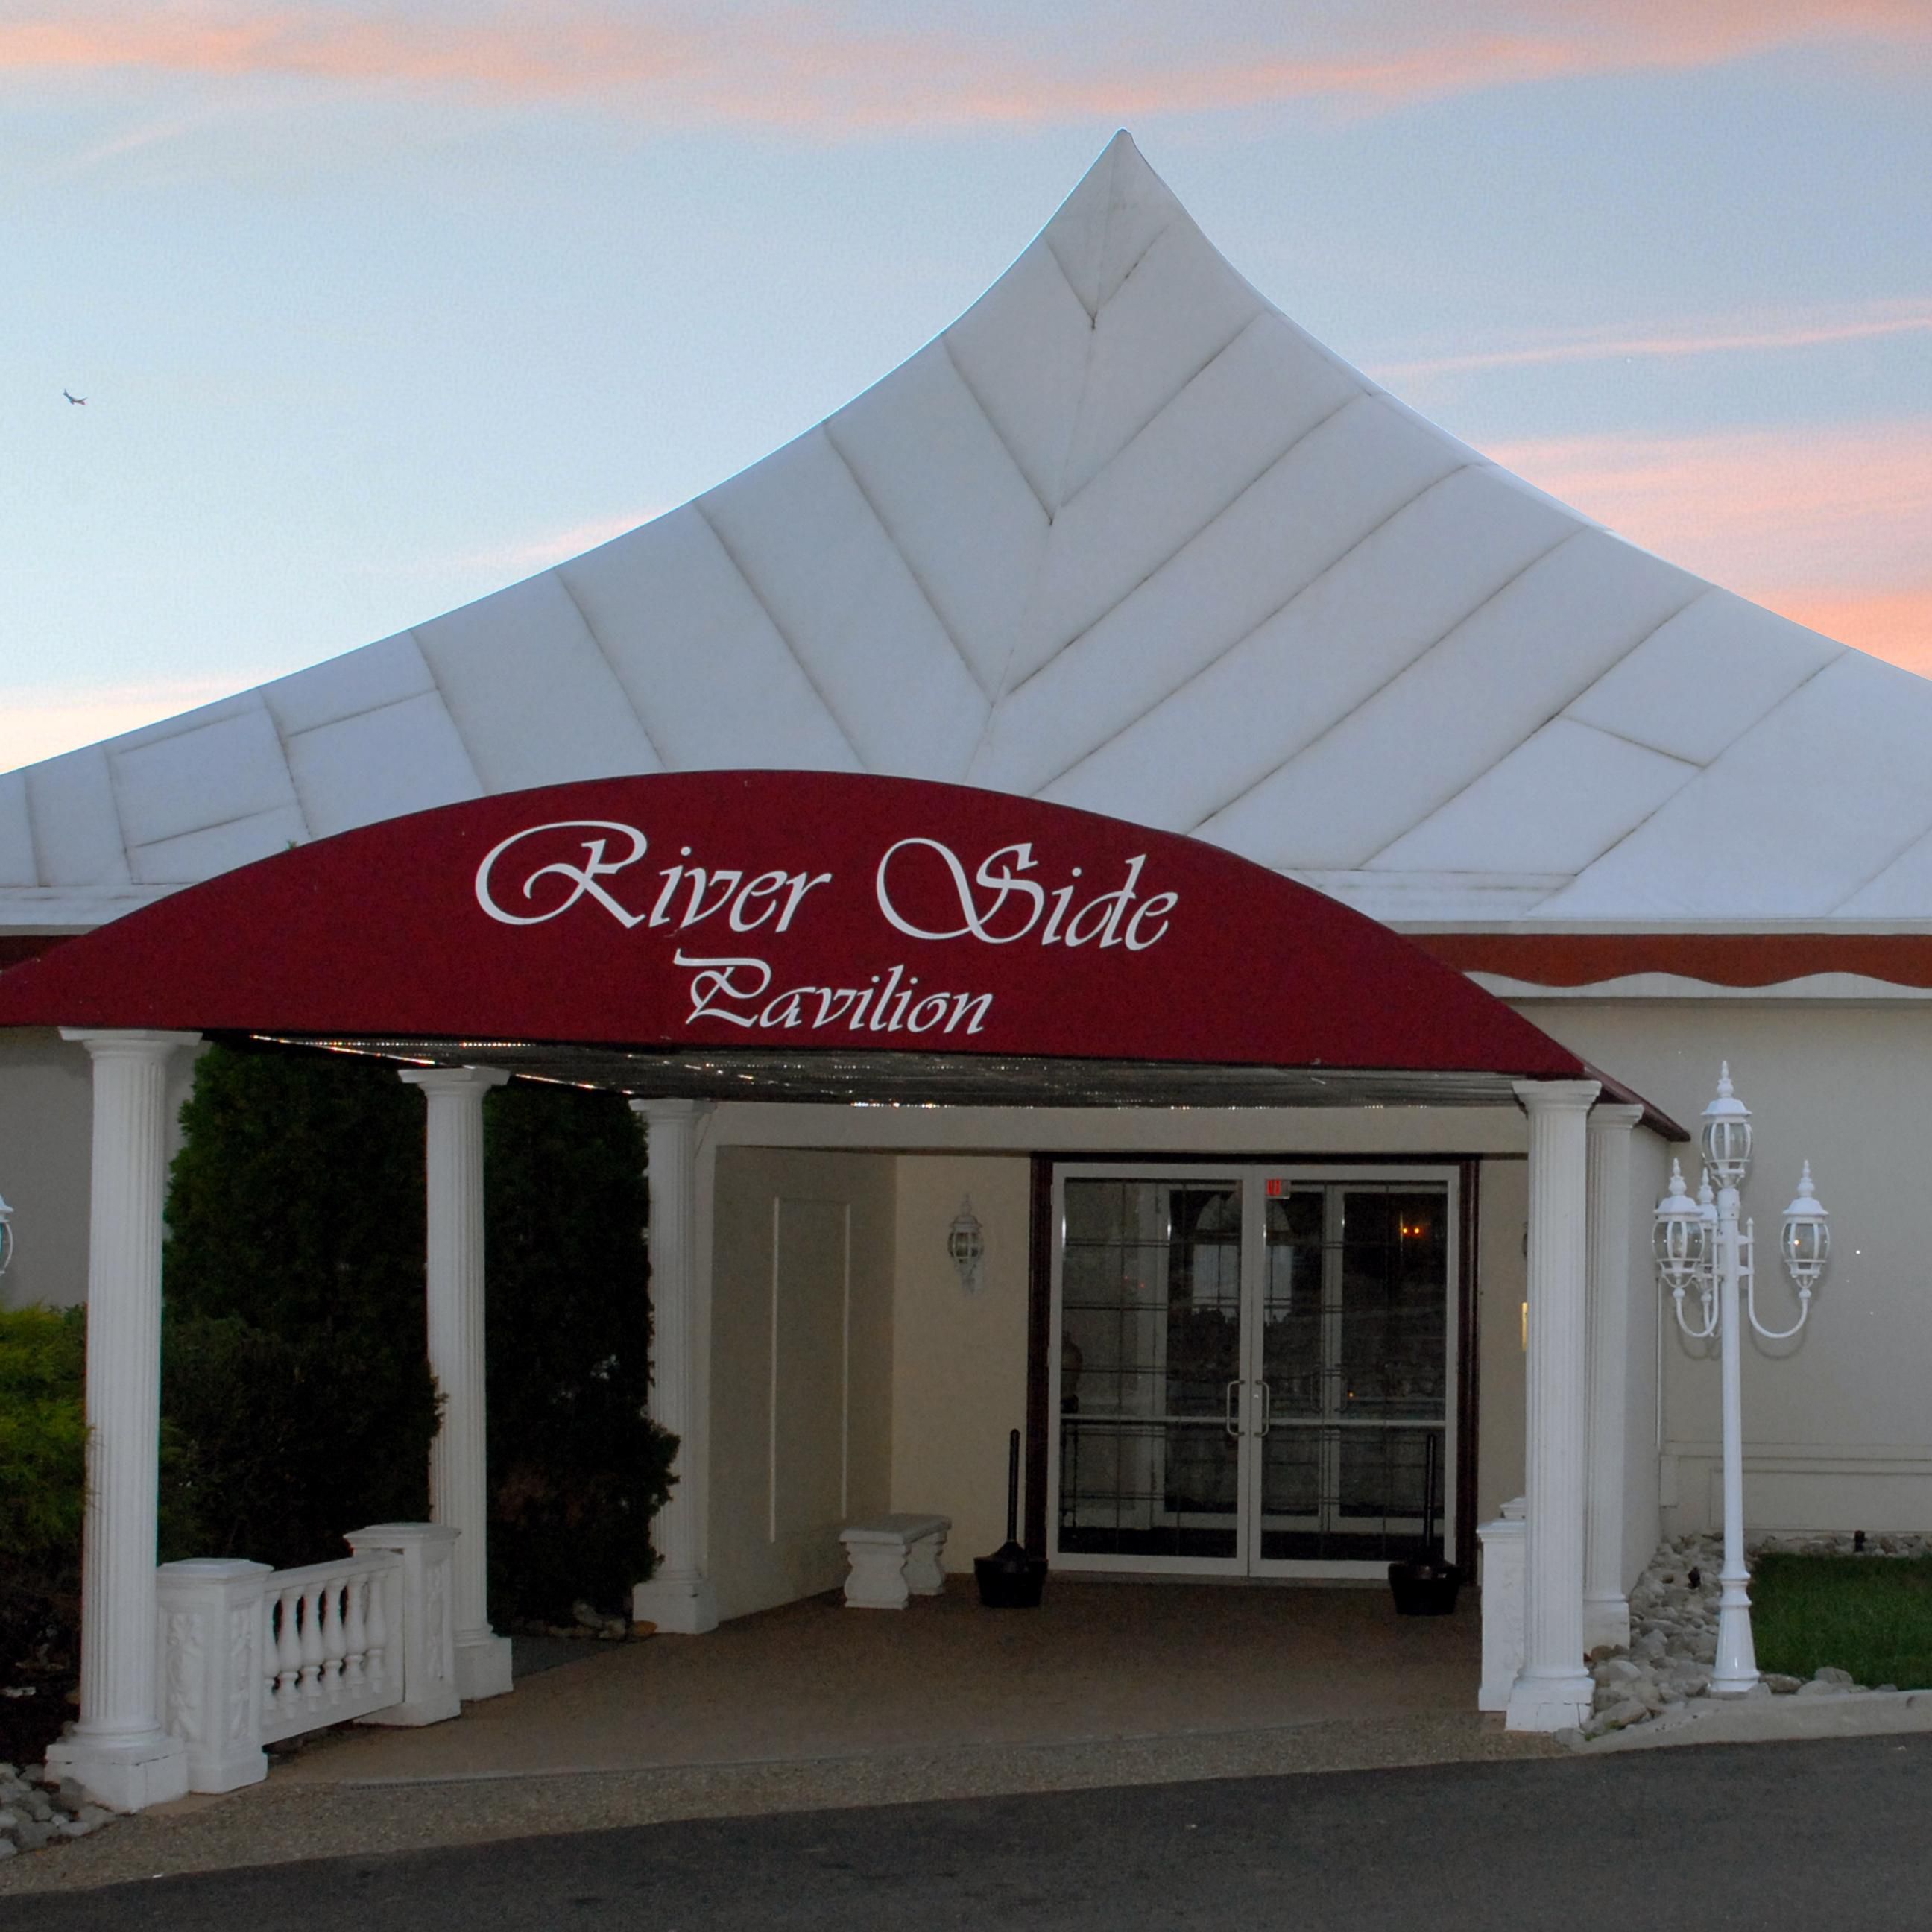 The Riverside Pavilion can accommodate up to 300 guests